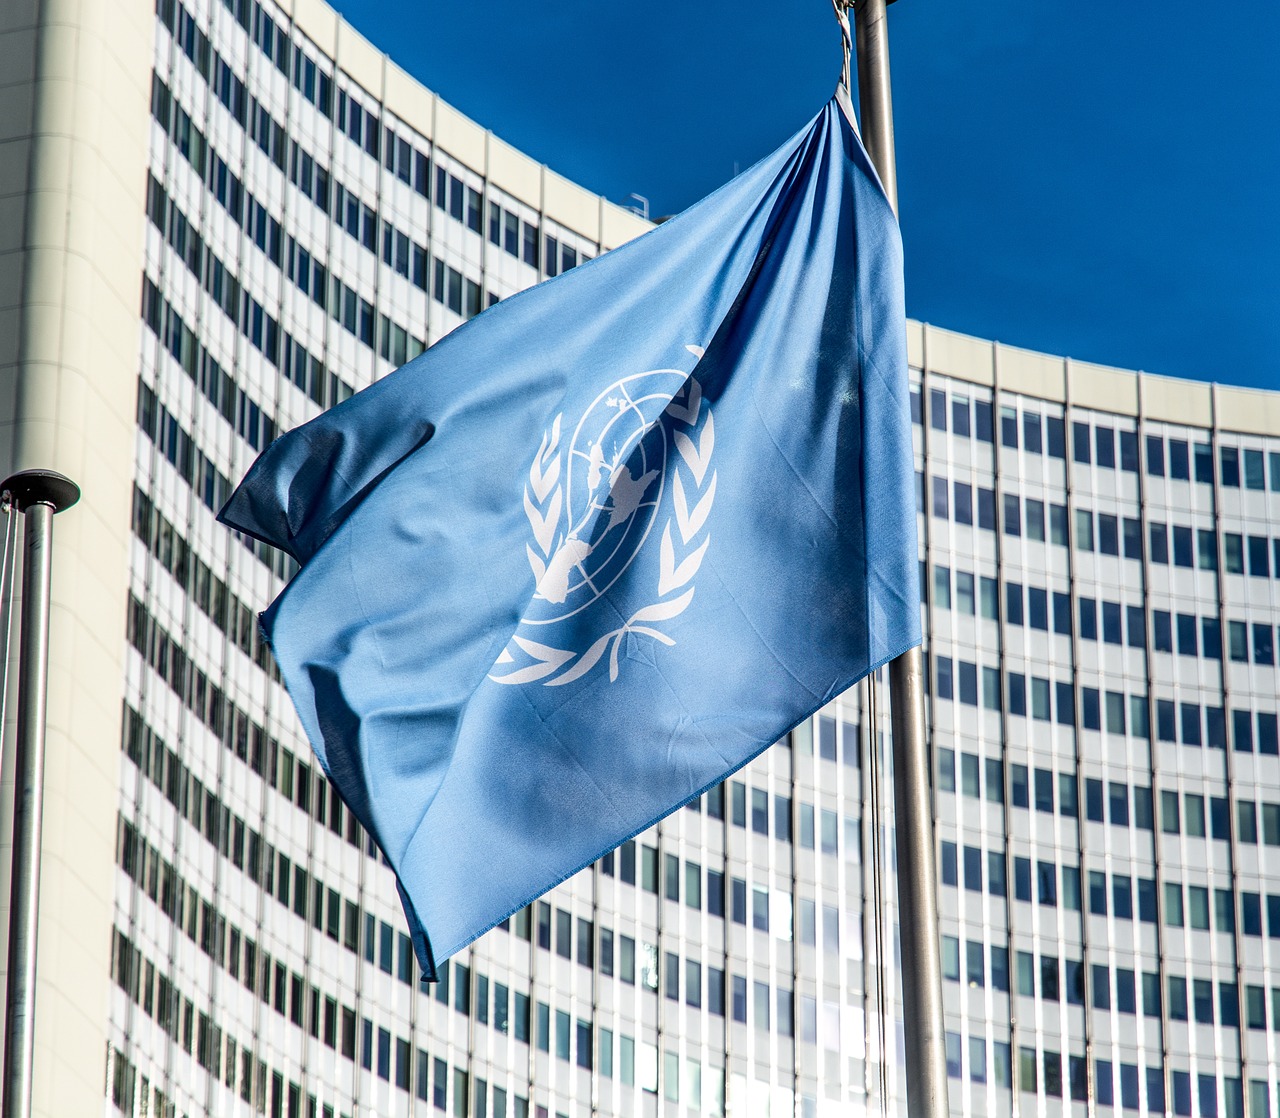 UN rights office condemns US gun violence, flags excessive force in Jacob Blake shooting